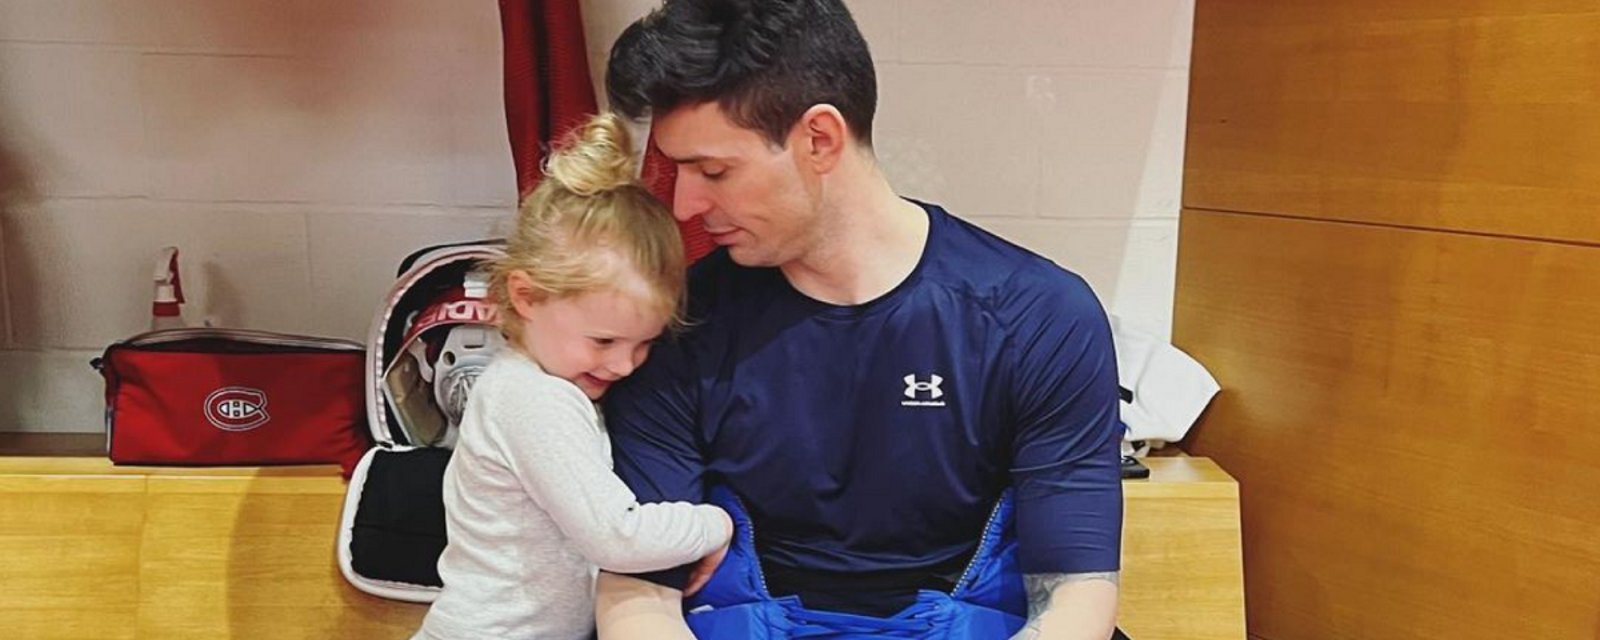 Carey Price and his family are leaving Quebec.